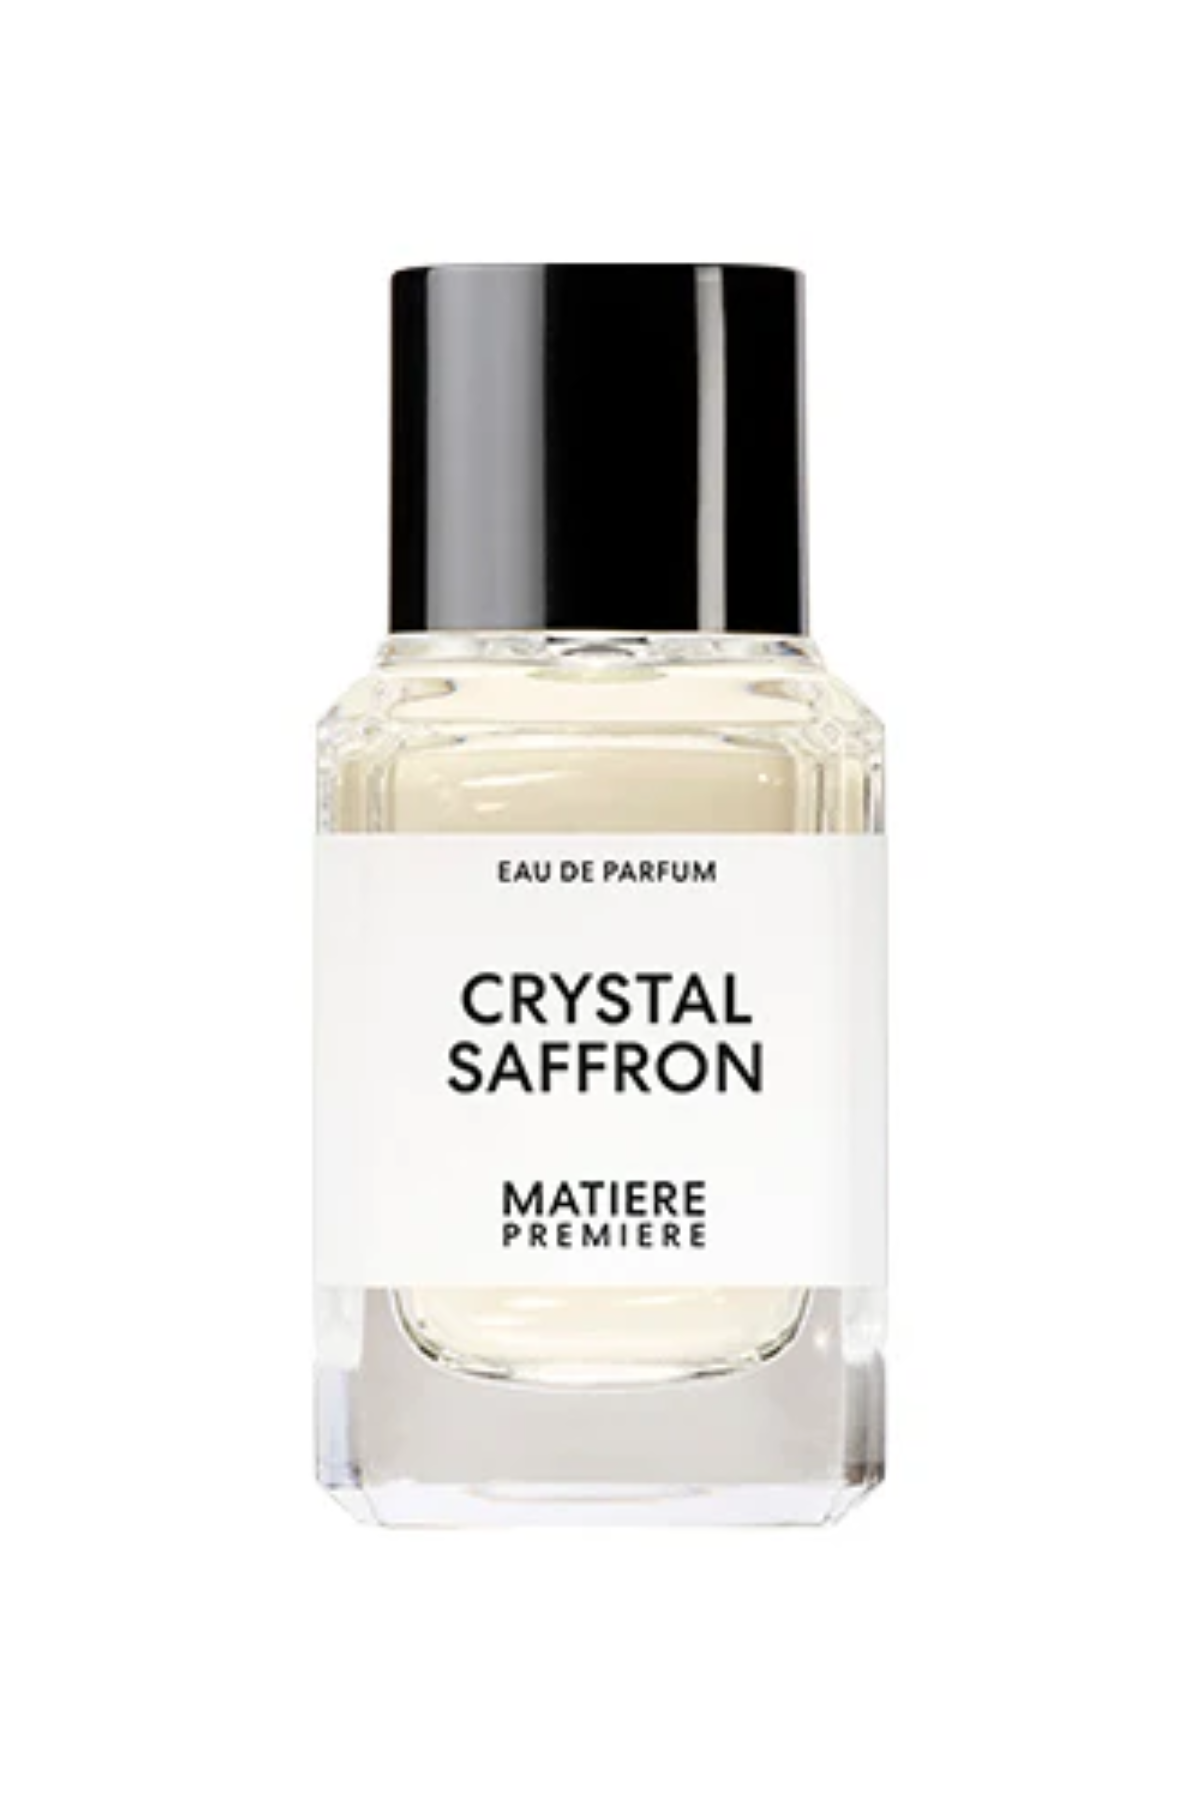 A bottle of Matiere Premiere Crystal Saffron perfume against a white background.